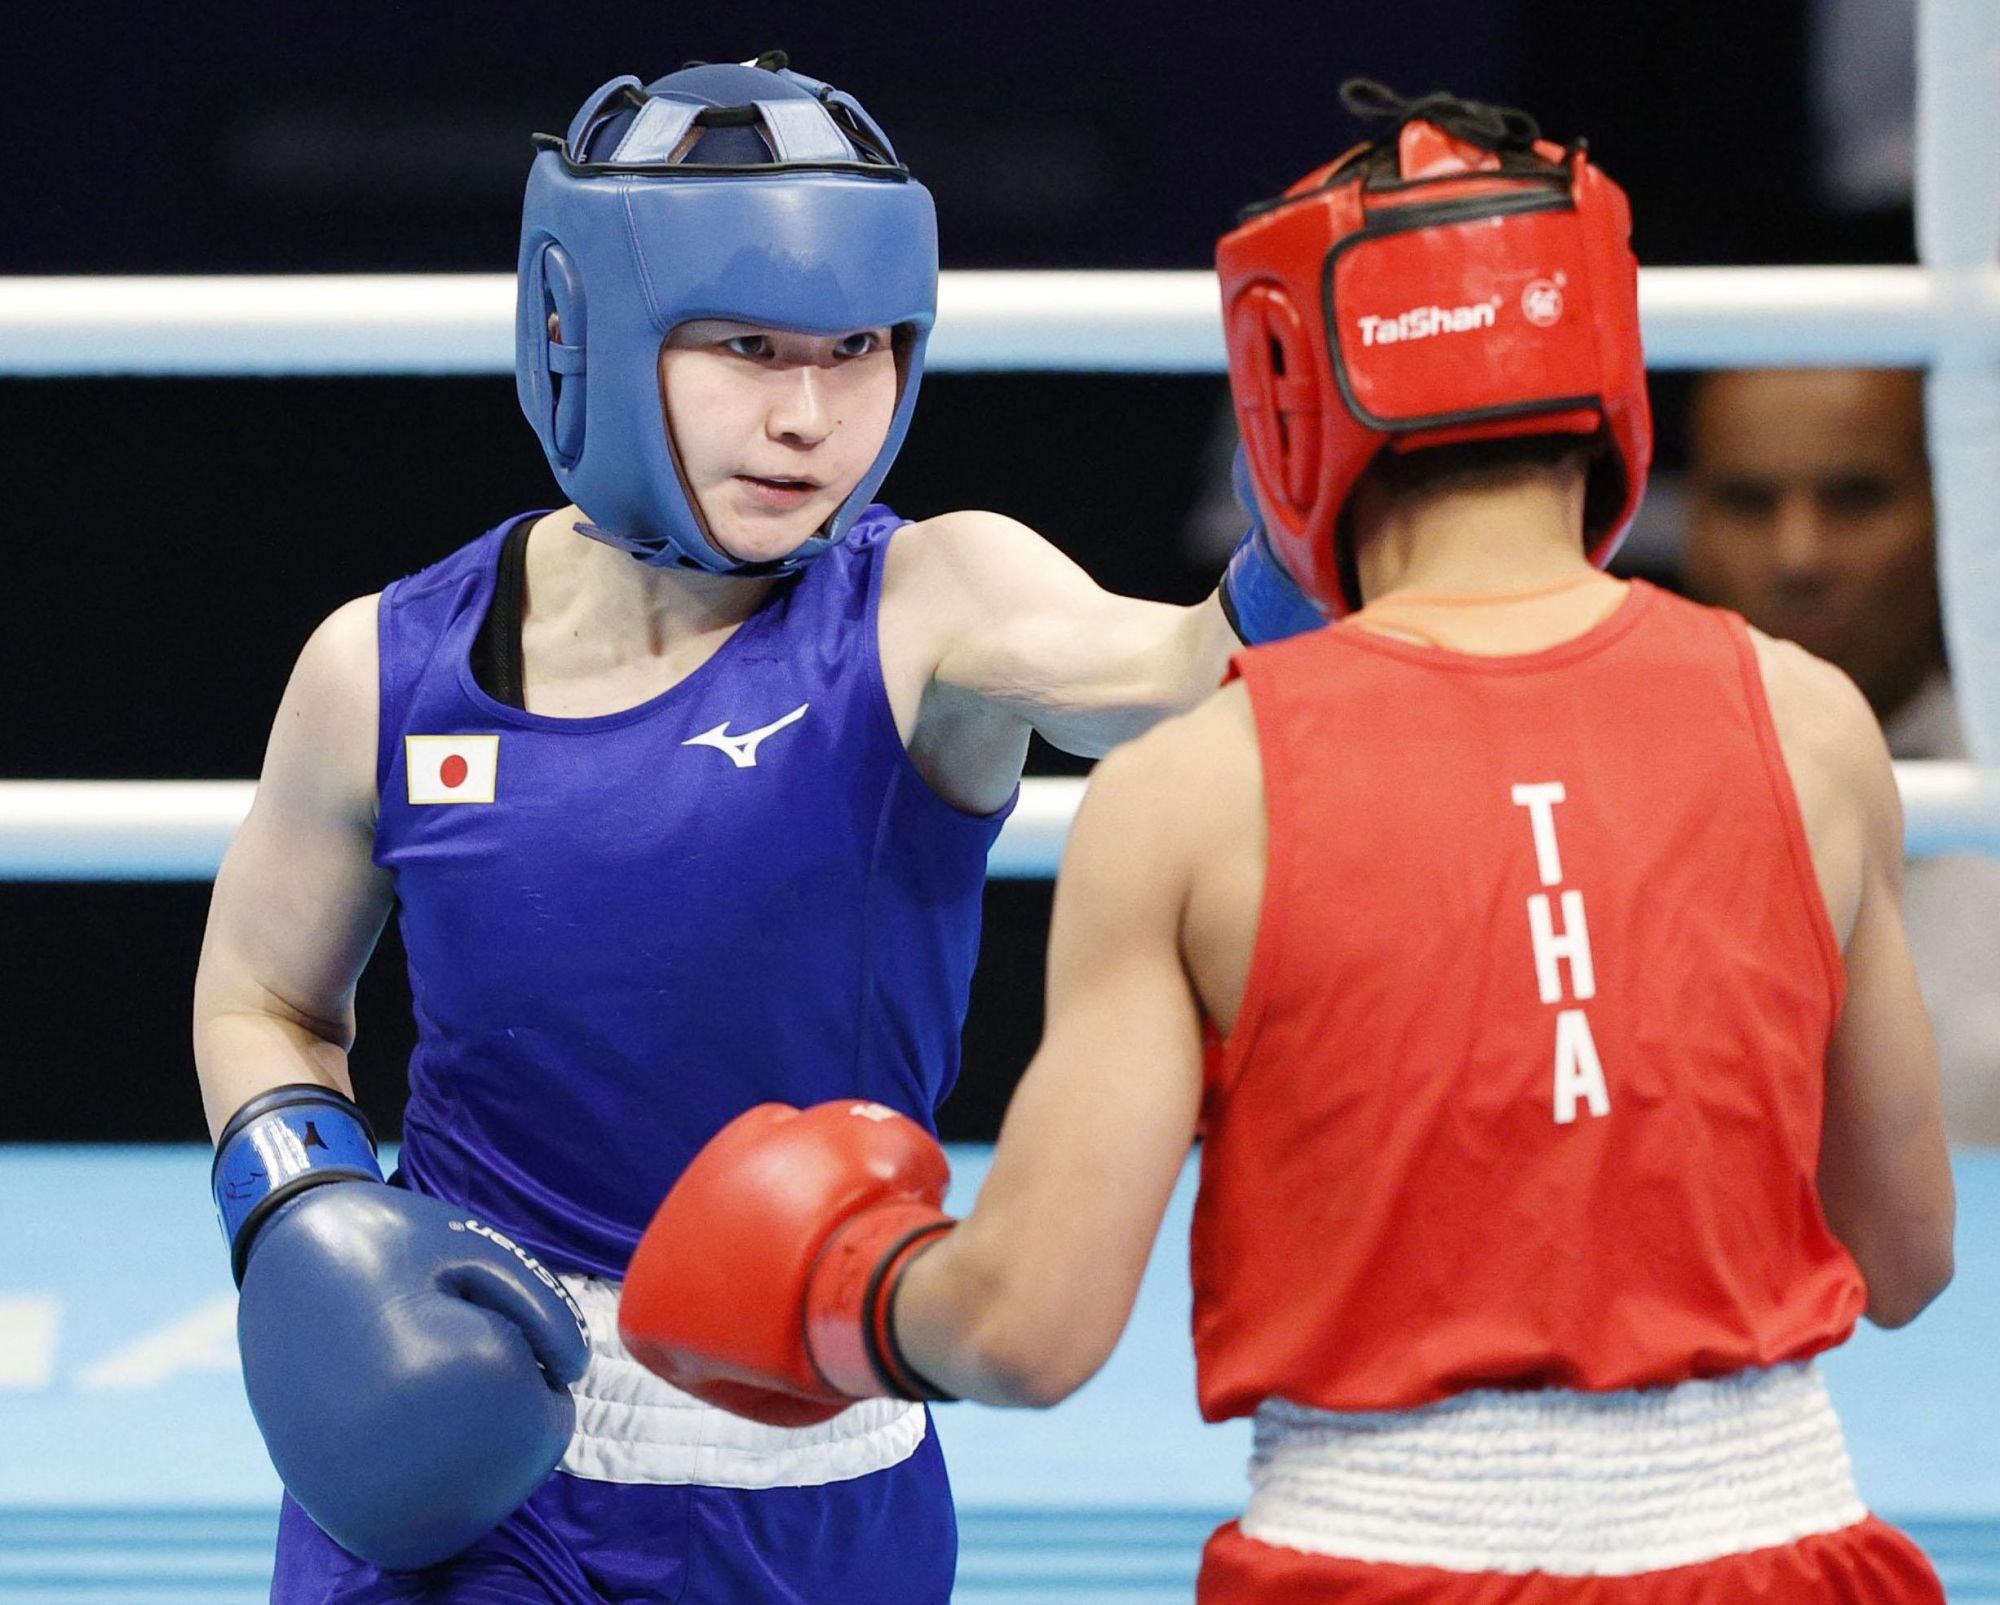 Tsukimi Namiki, Sena Irie become first Japanese female boxers to qualify  for Olympics - The Japan Times